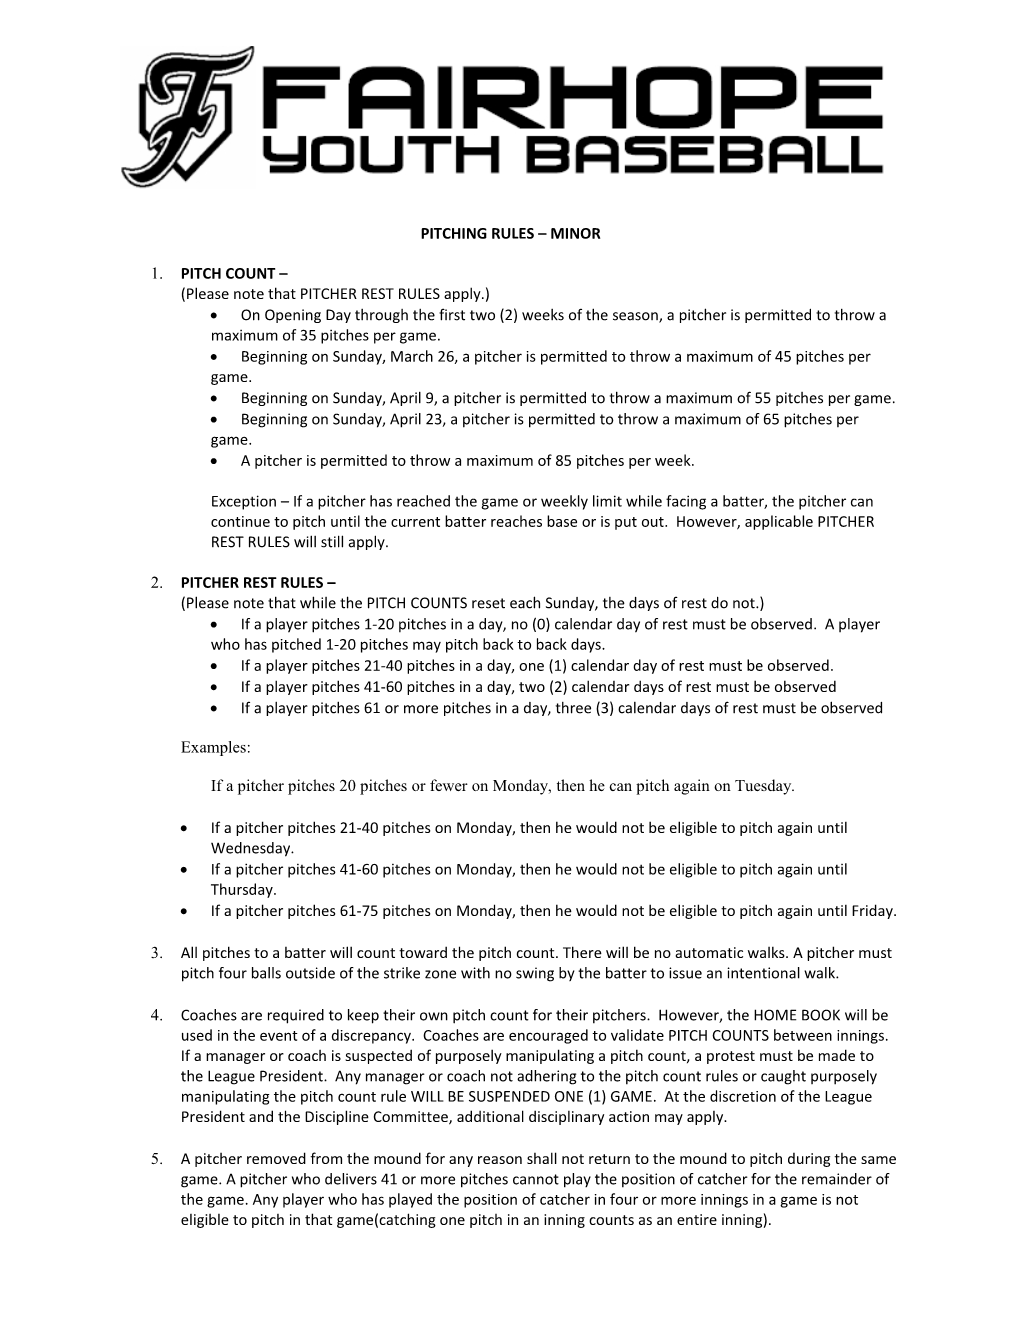 Pitching Rules Minor